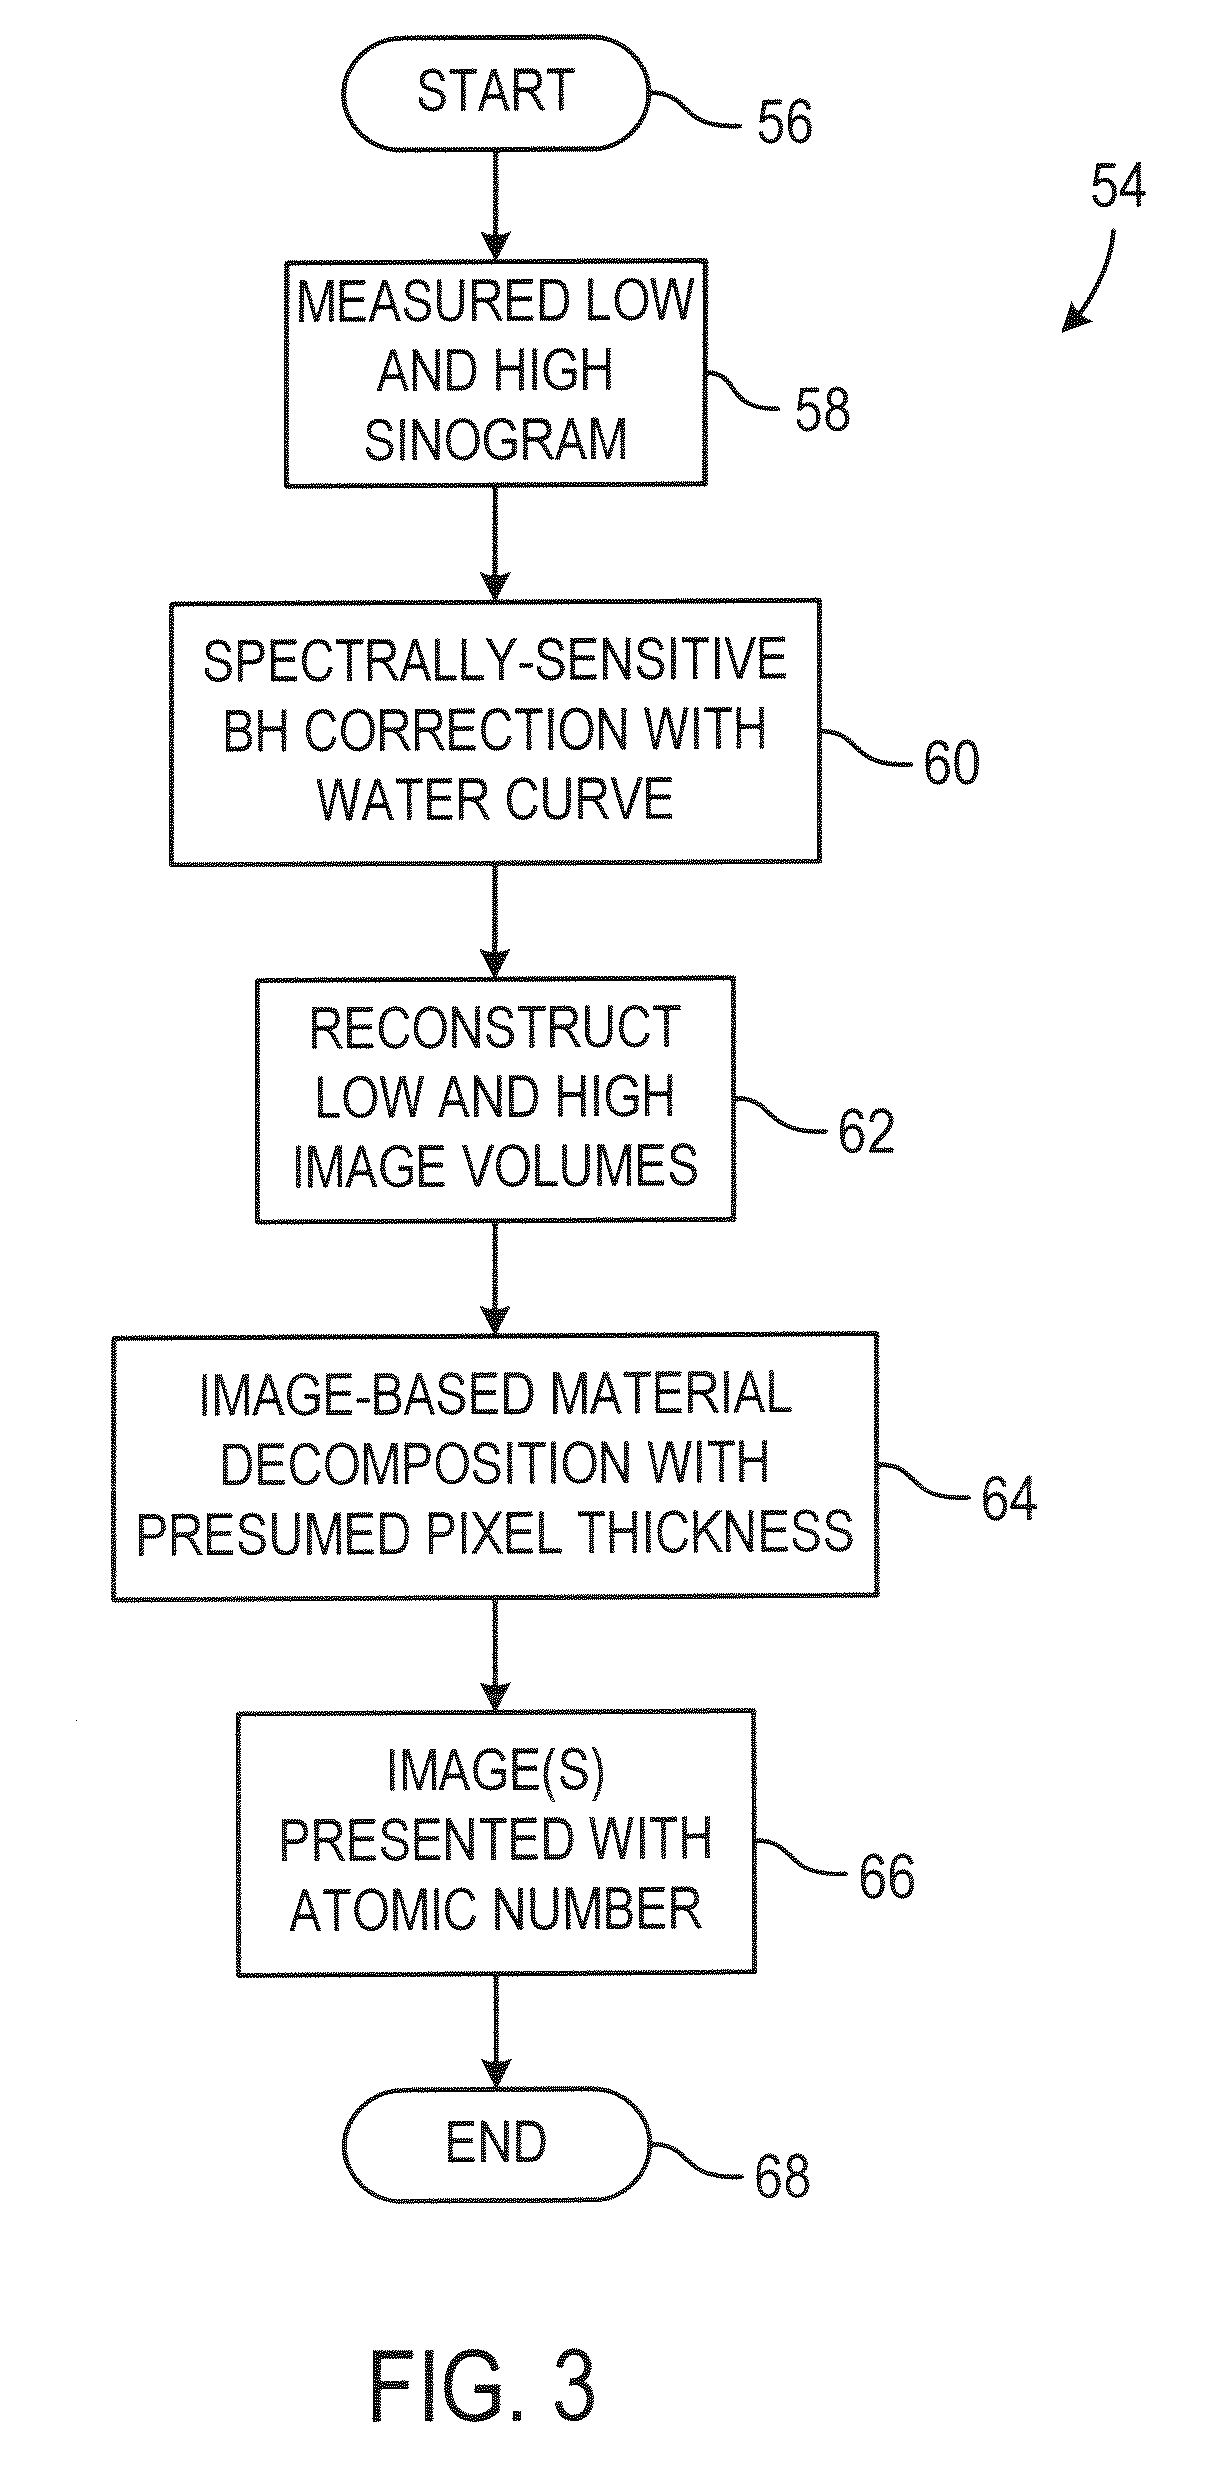 Image-based material decomposition